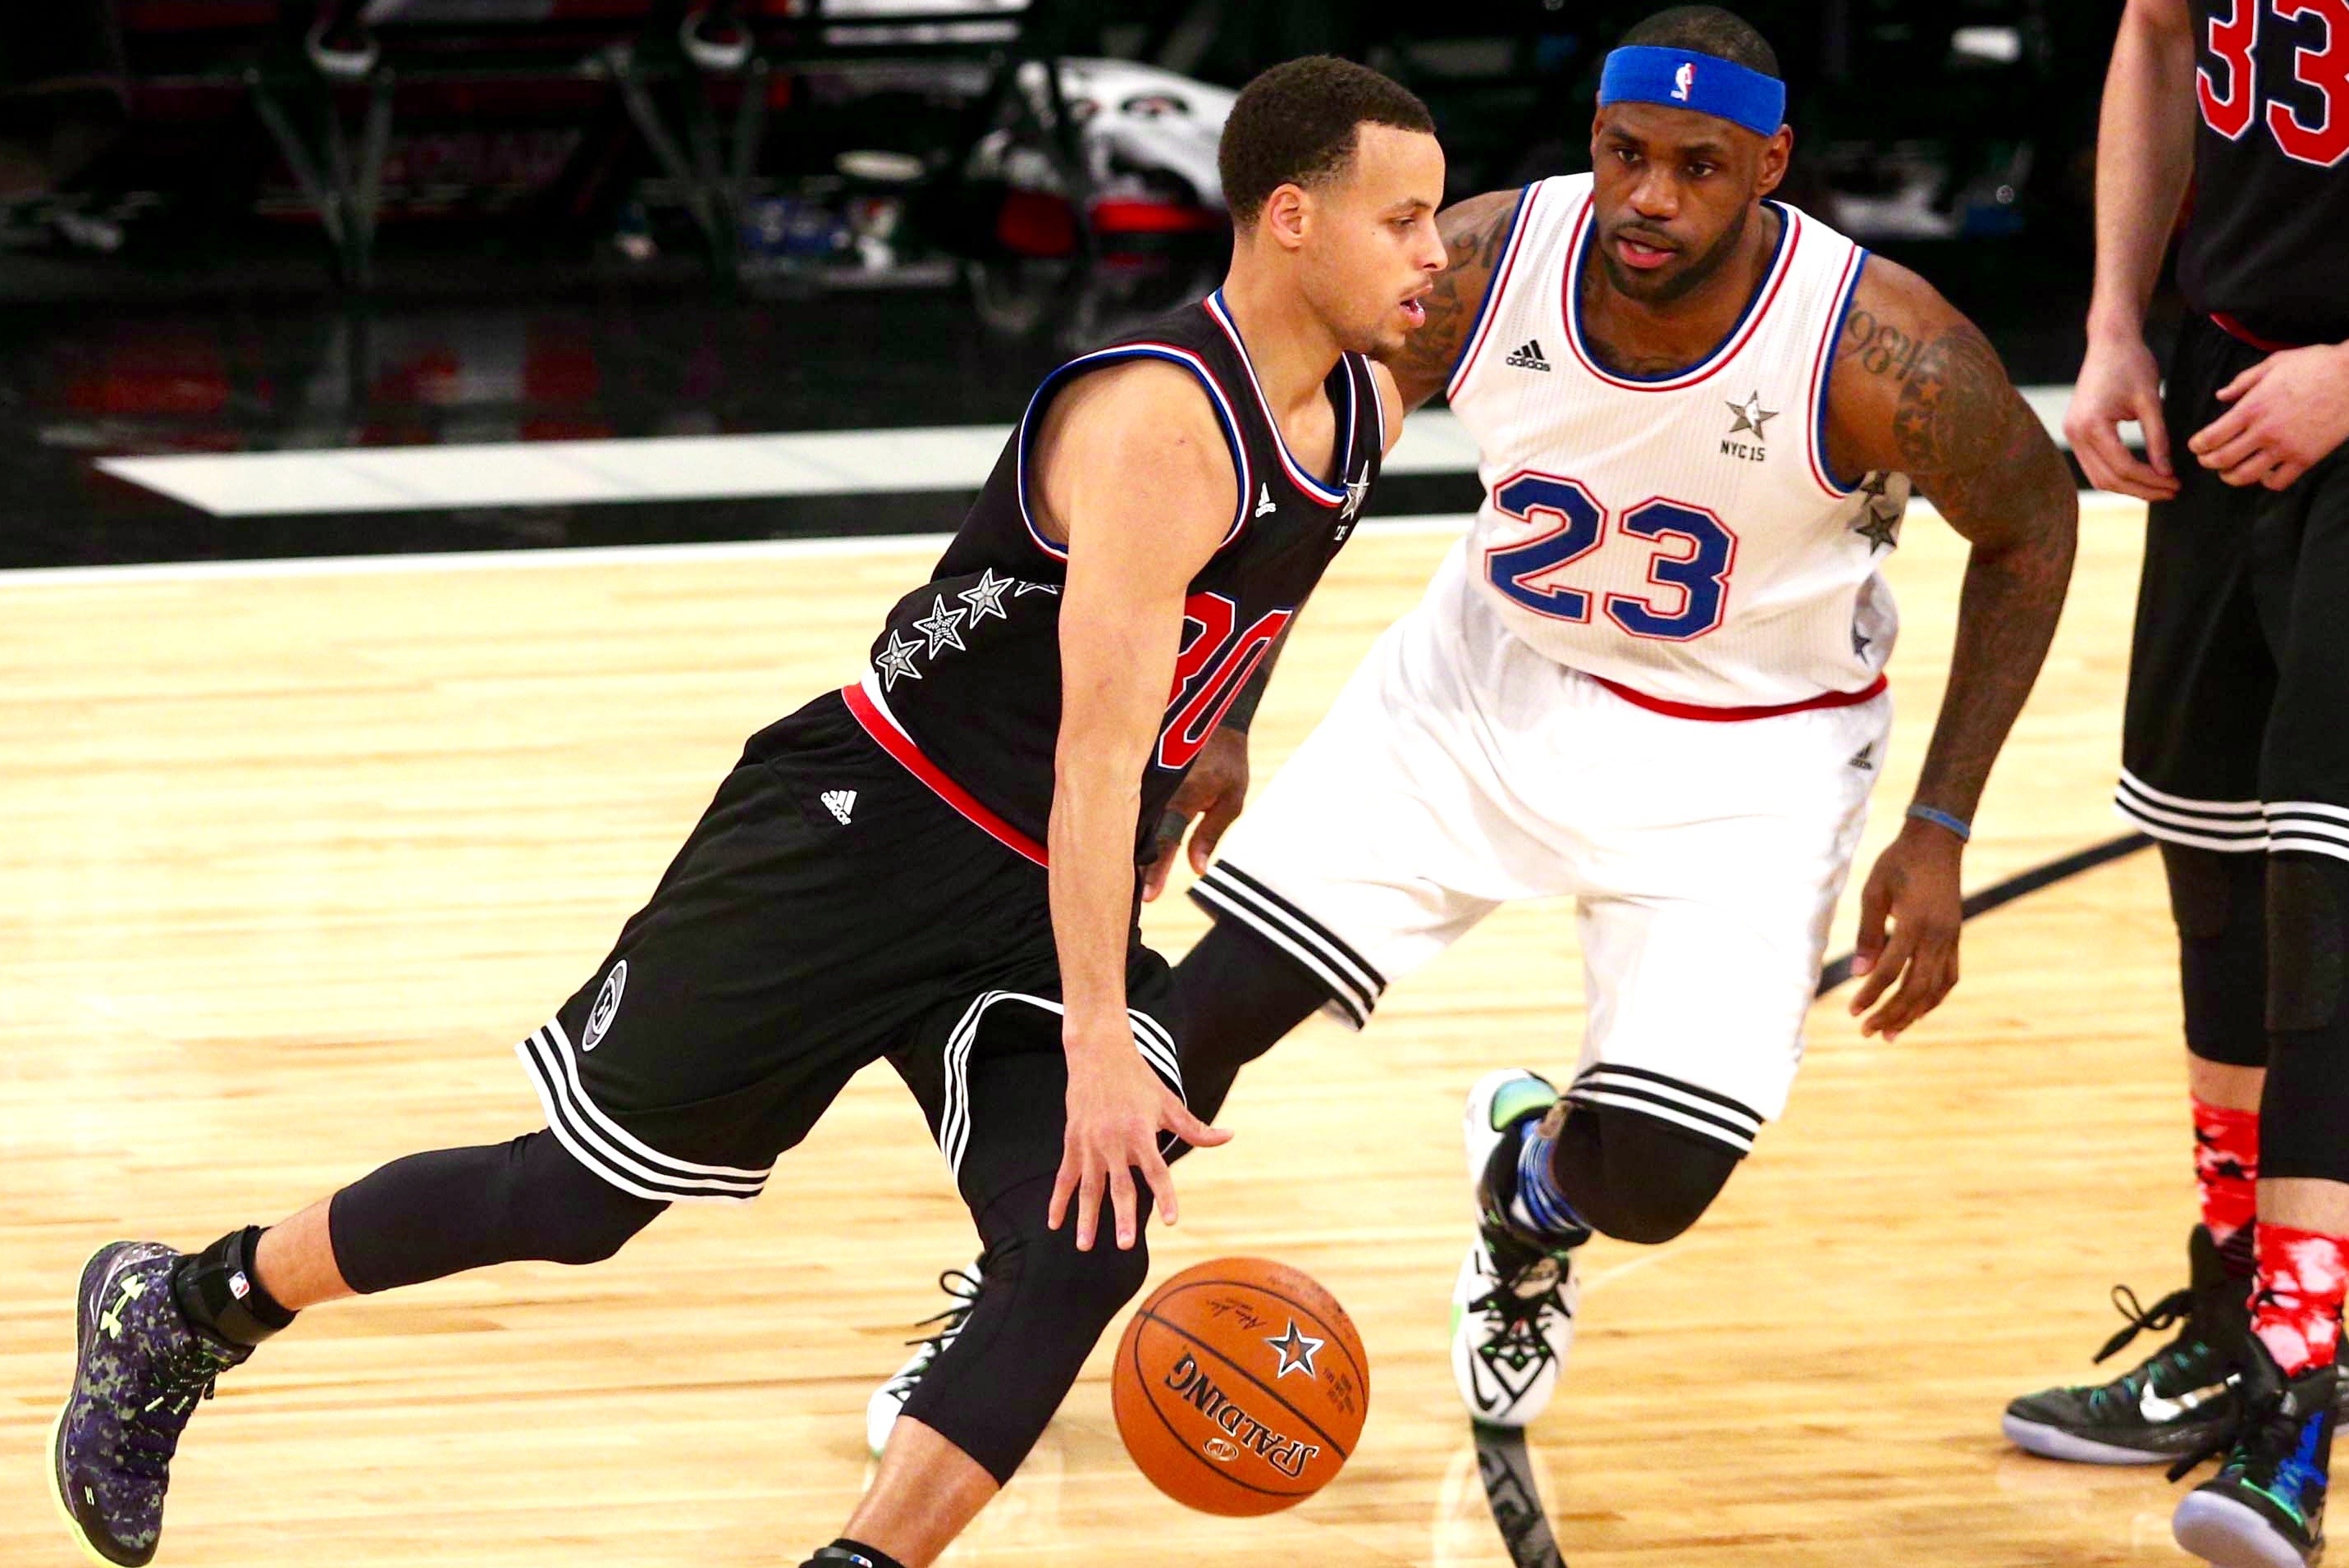 Steph Curry dazzles as Team LeBron wins All-Star Game